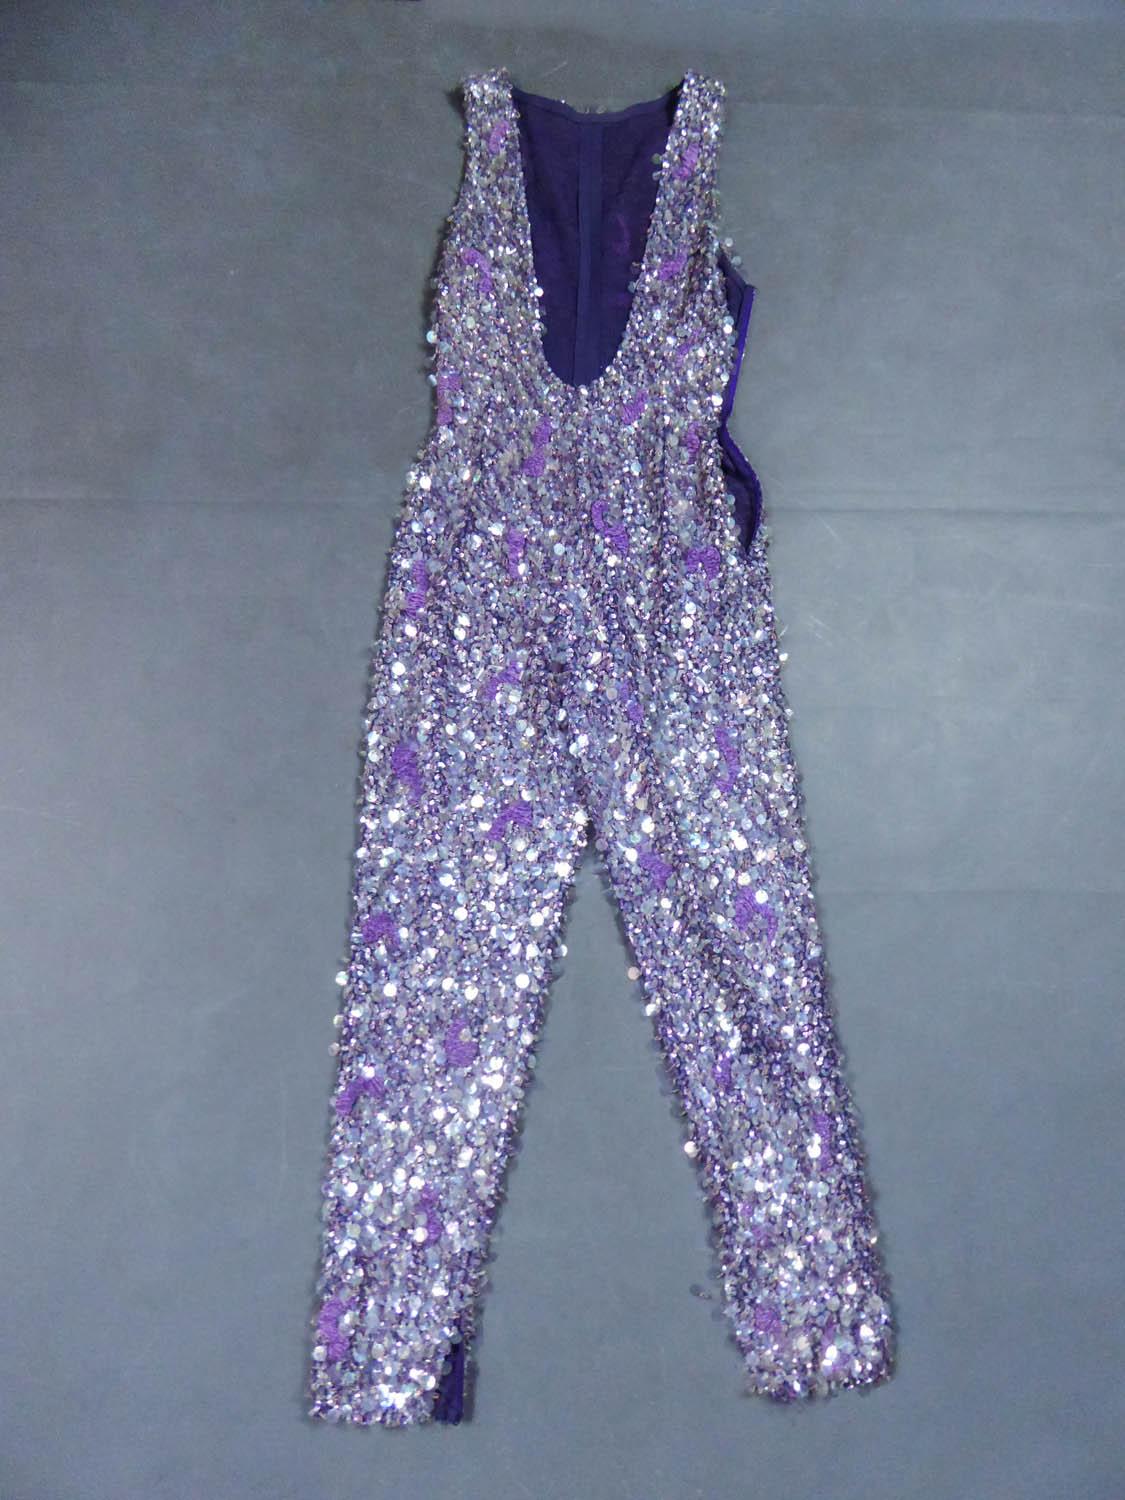 Circa 1968/1970
Italy

Amazing psyquedelic trousers suit from the famous Italian designer house Mila Schön from the 1970s. Entirely hand-embroidered with iridescent glitter, rhodoid sequins and pearlescent and purple glass beads. Embroidery of